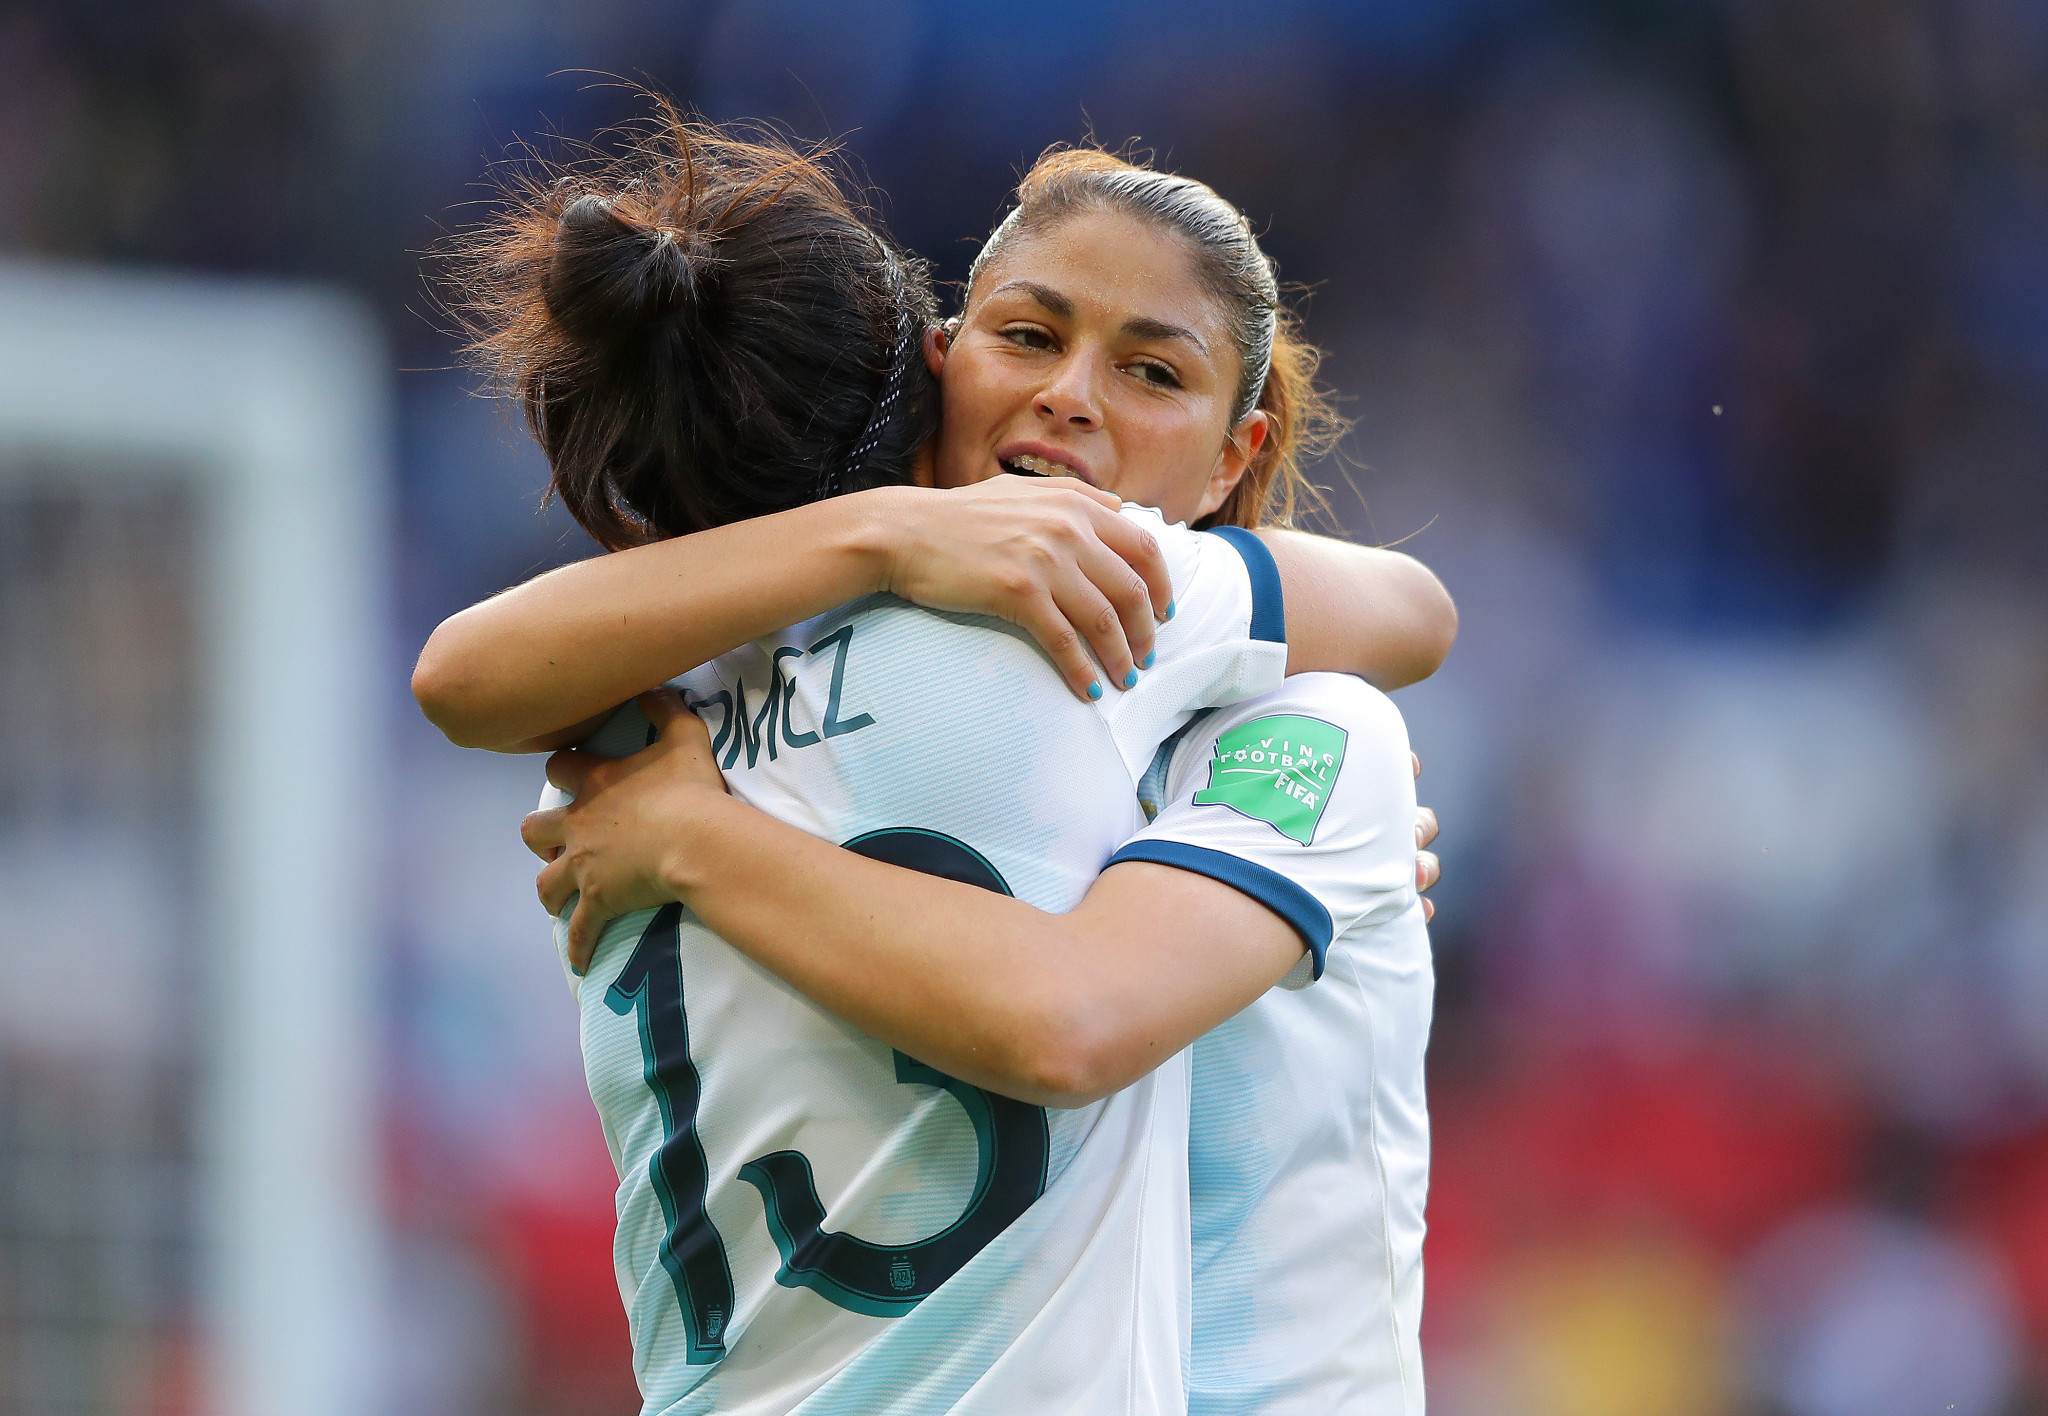 Argentina players Virginia Gomez and Adriana Sachs embrace after securing a 0-0 draw in their opening FIFA World Cup match against Japan ©Getty Images